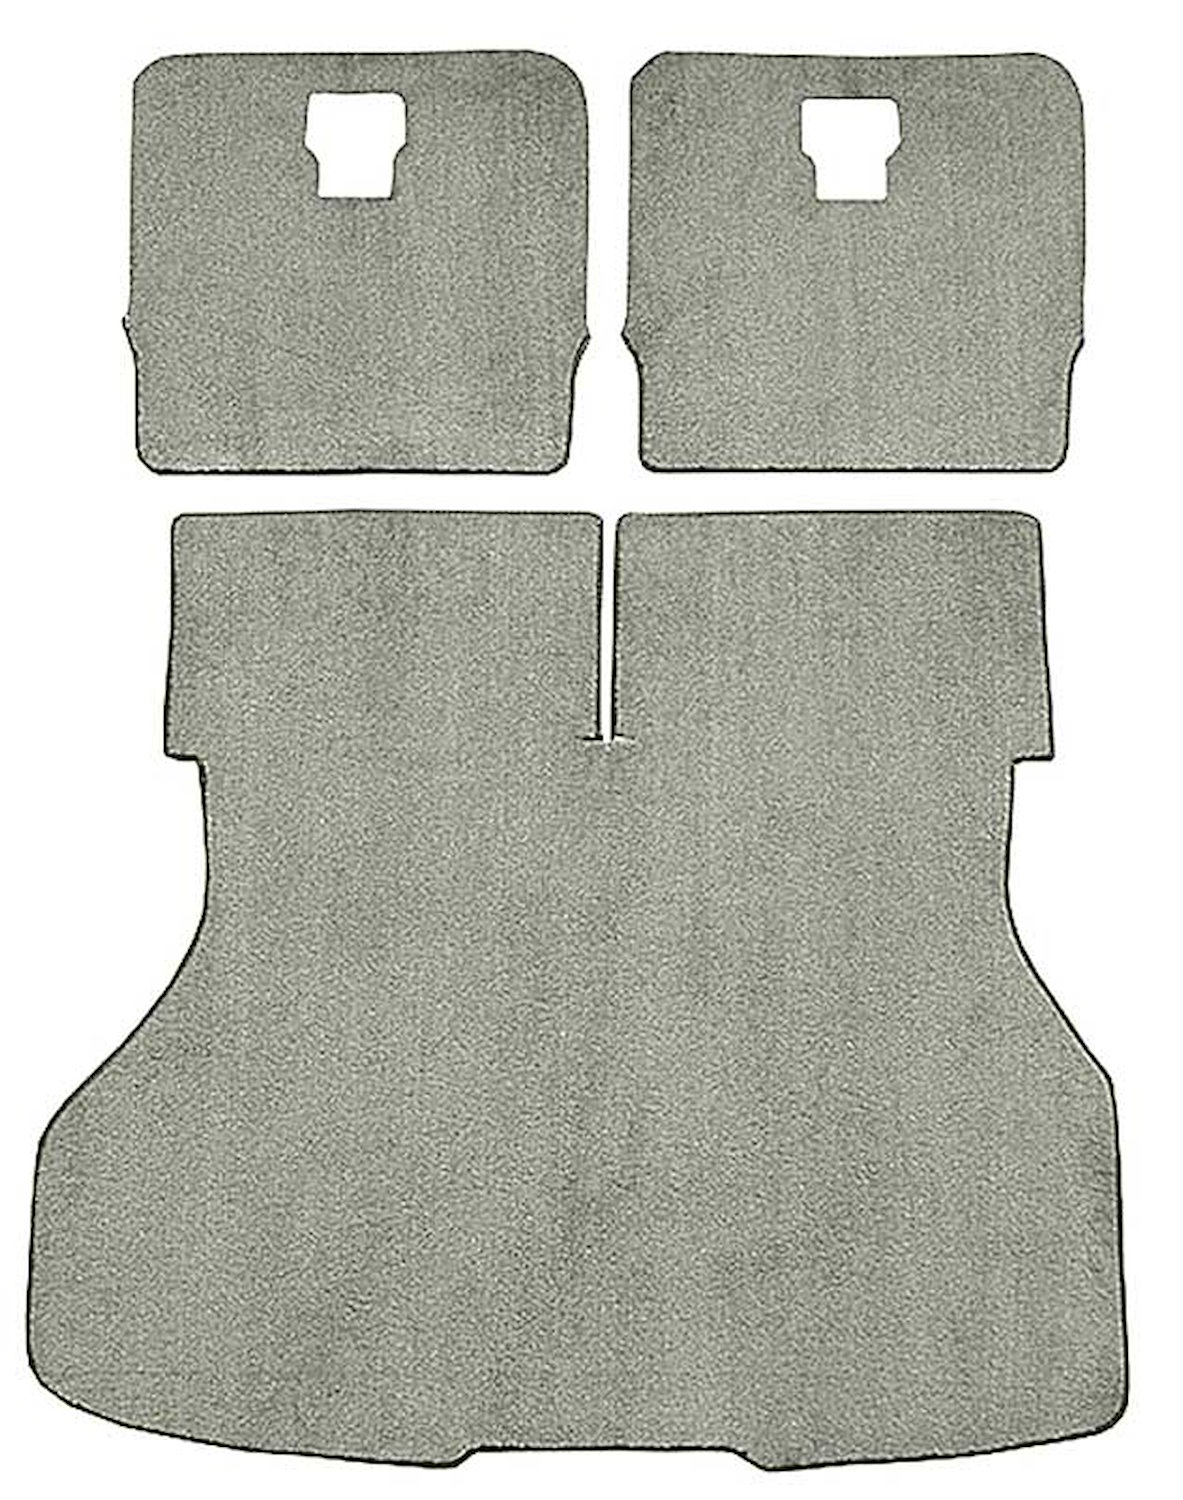 A4026B91 Rear Cargo Area Cut Pile Carpet Set With Mass Backing 1987-93 Mustang Hatchback; Antelope Neutral